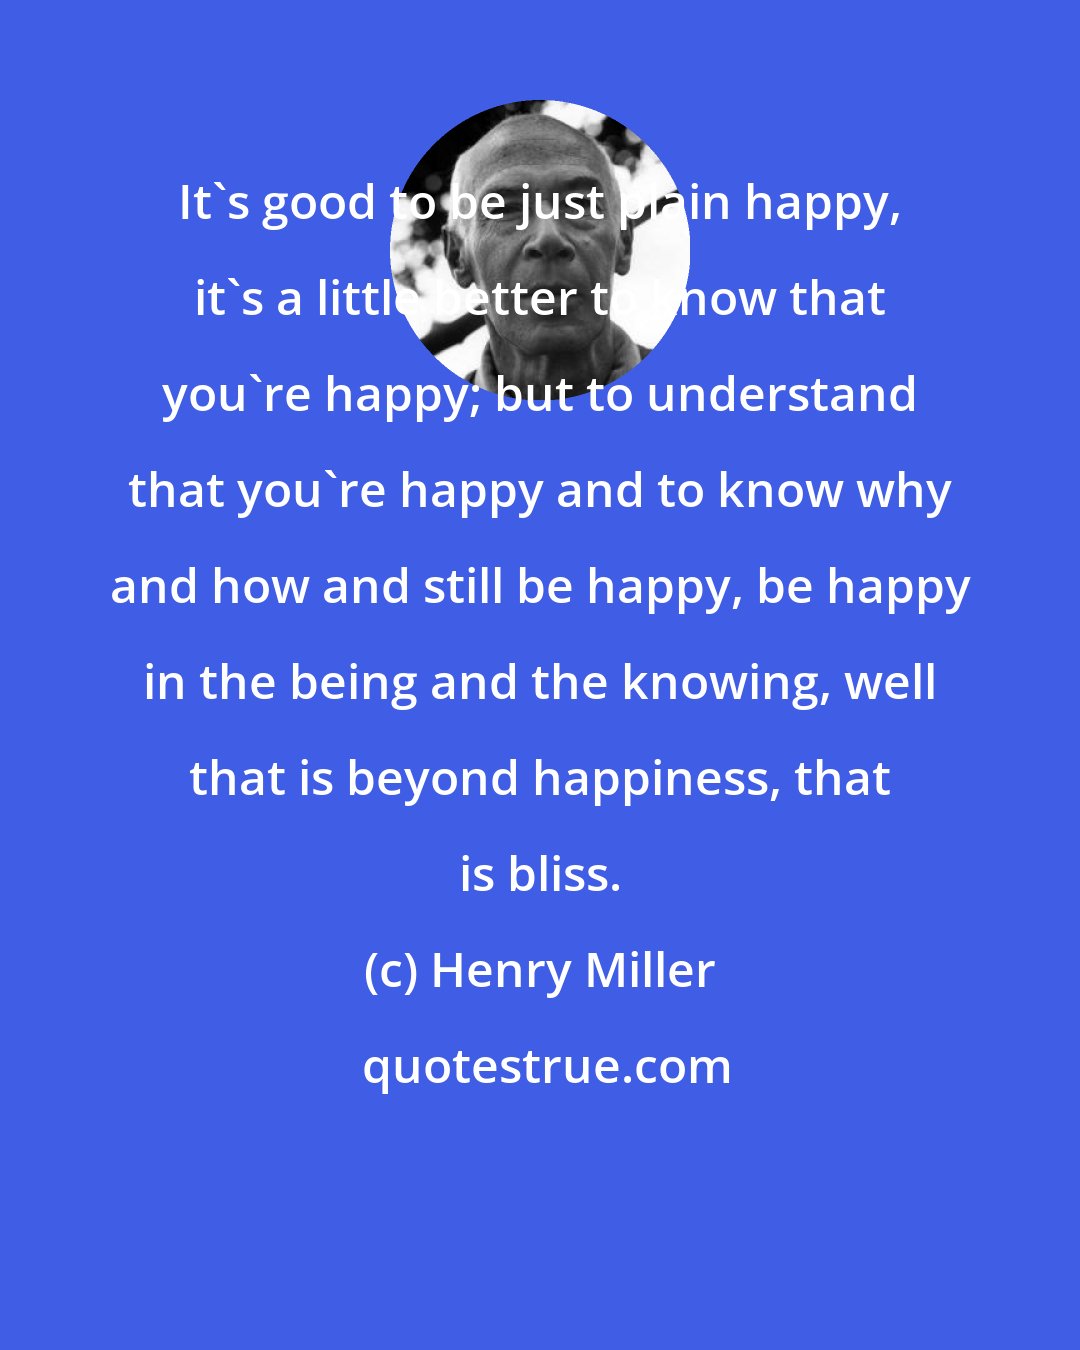 Henry Miller: It's good to be just plain happy, it's a little better to know that you're happy; but to understand that you're happy and to know why and how and still be happy, be happy in the being and the knowing, well that is beyond happiness, that is bliss.